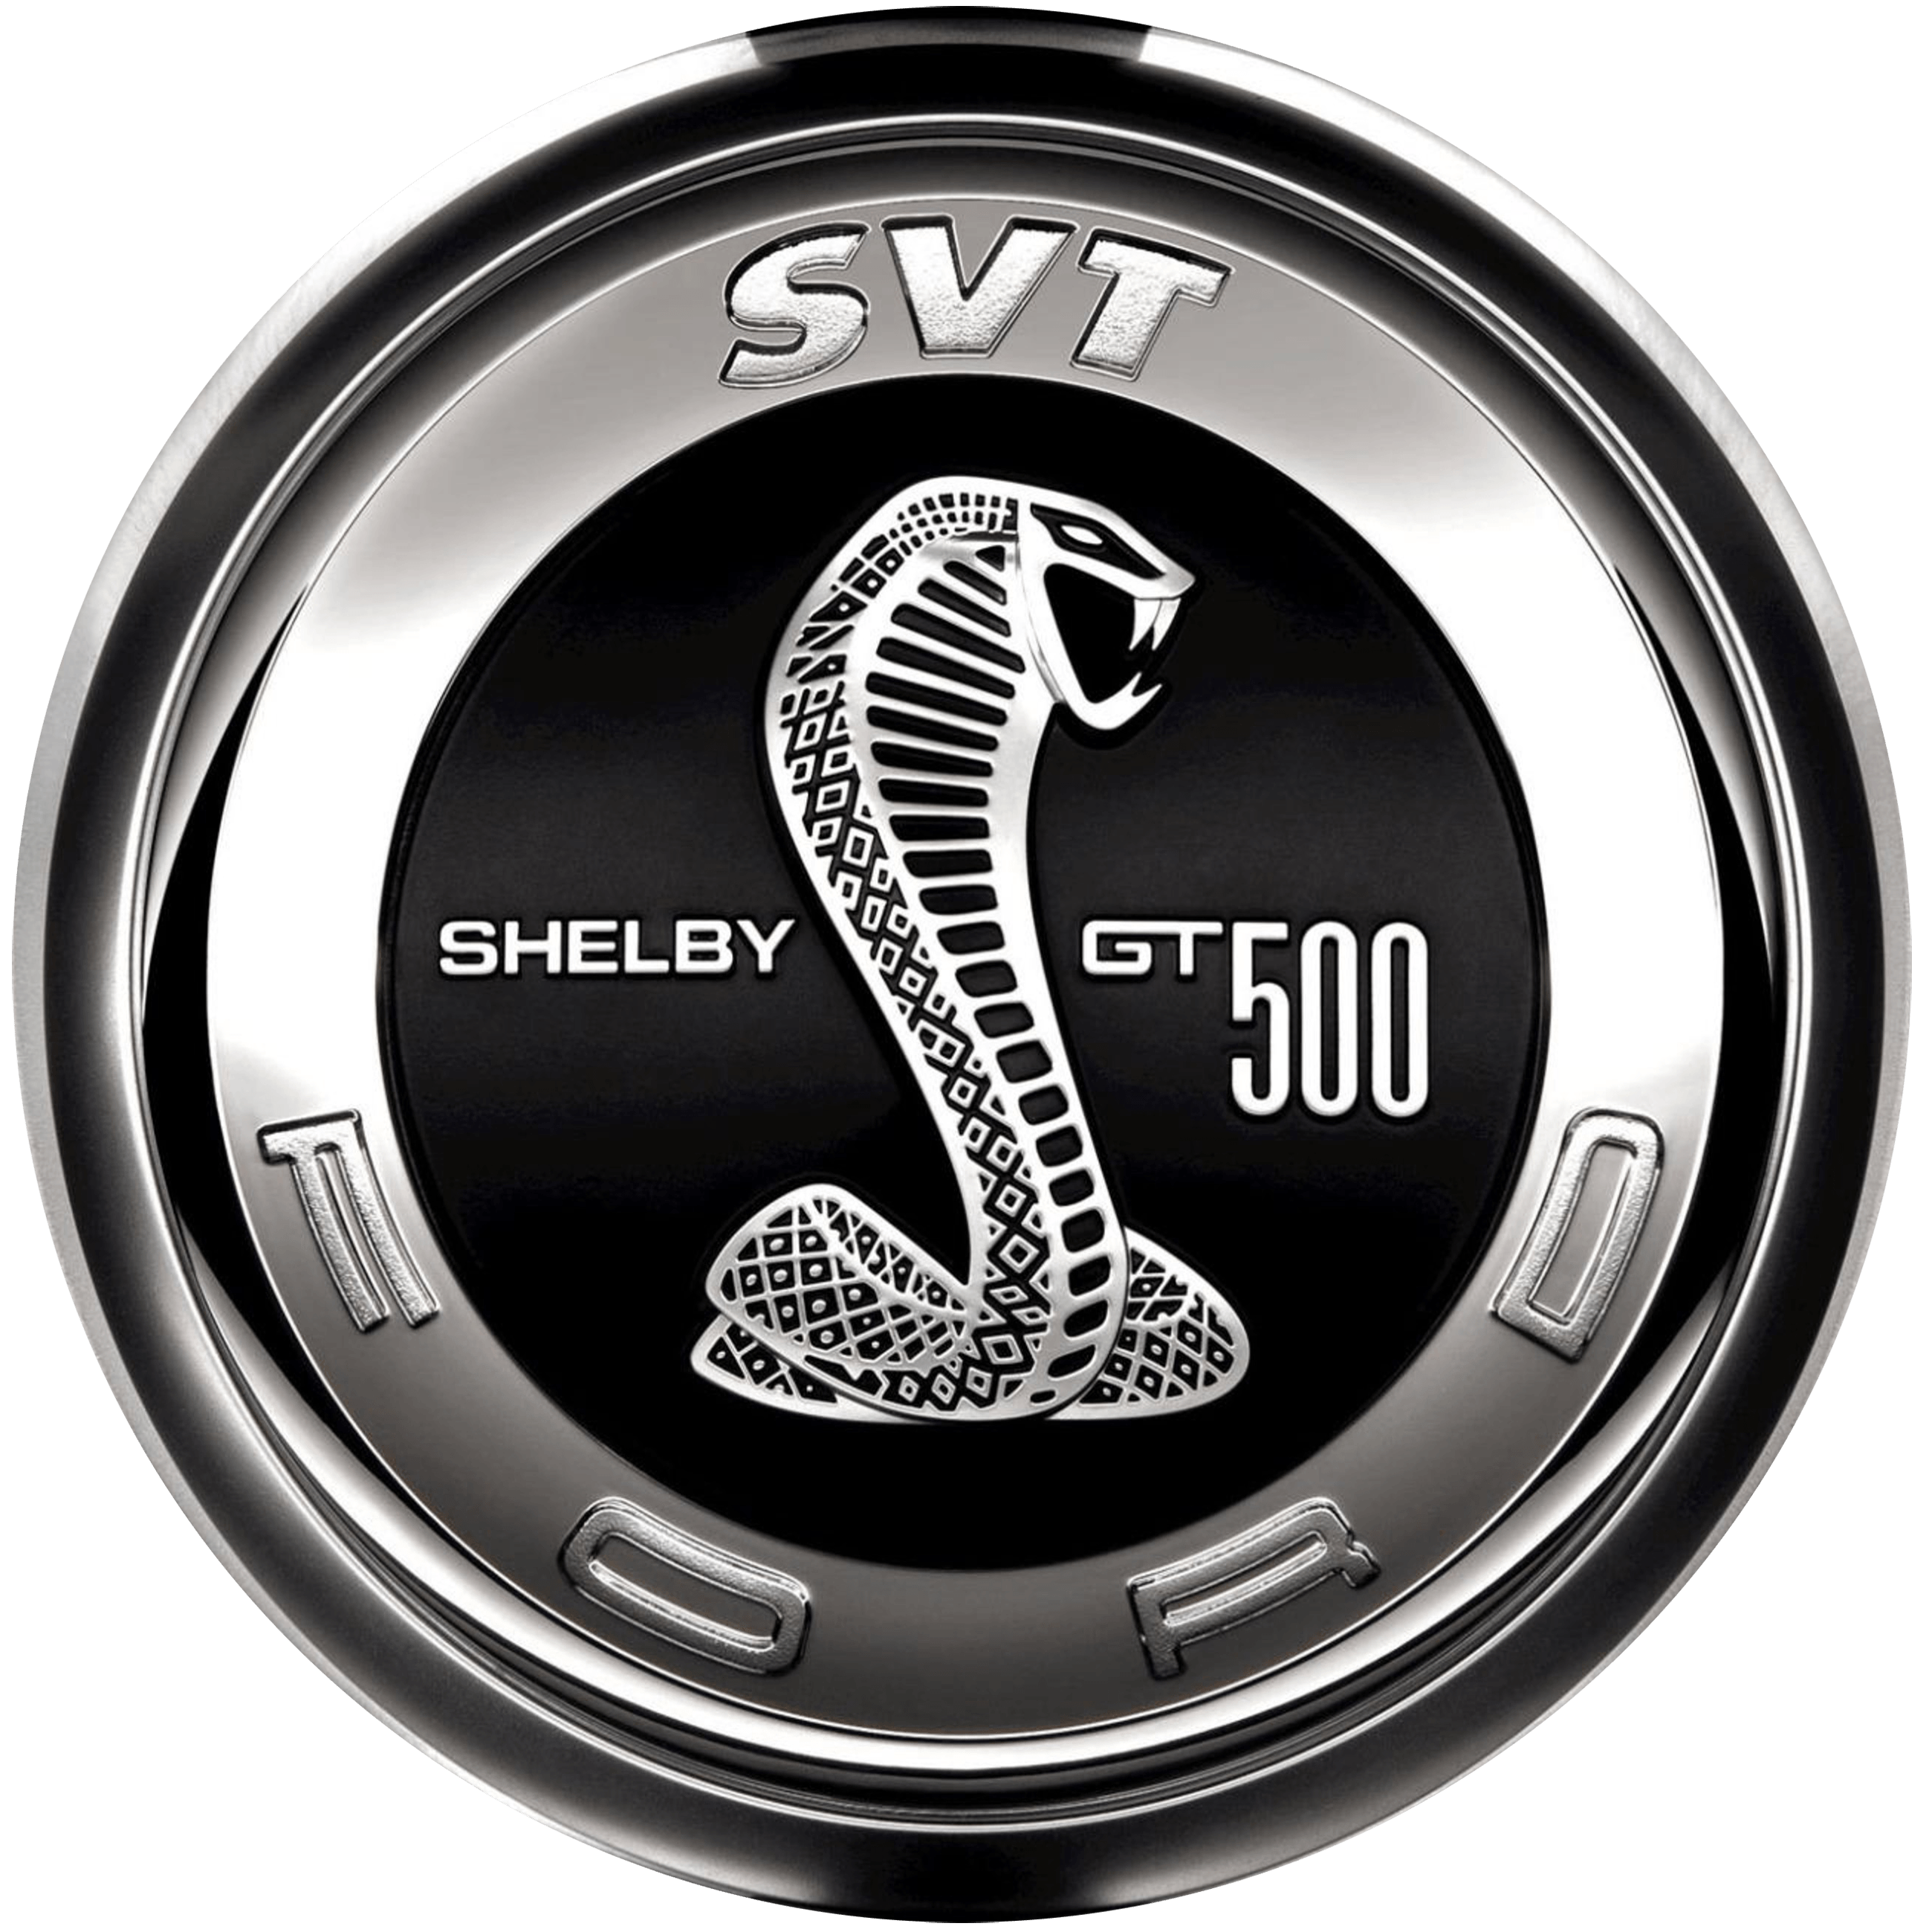 Shelby Logo - Shelby Logo PNG Transparent Shelby Logo.PNG Images. | PlusPNG